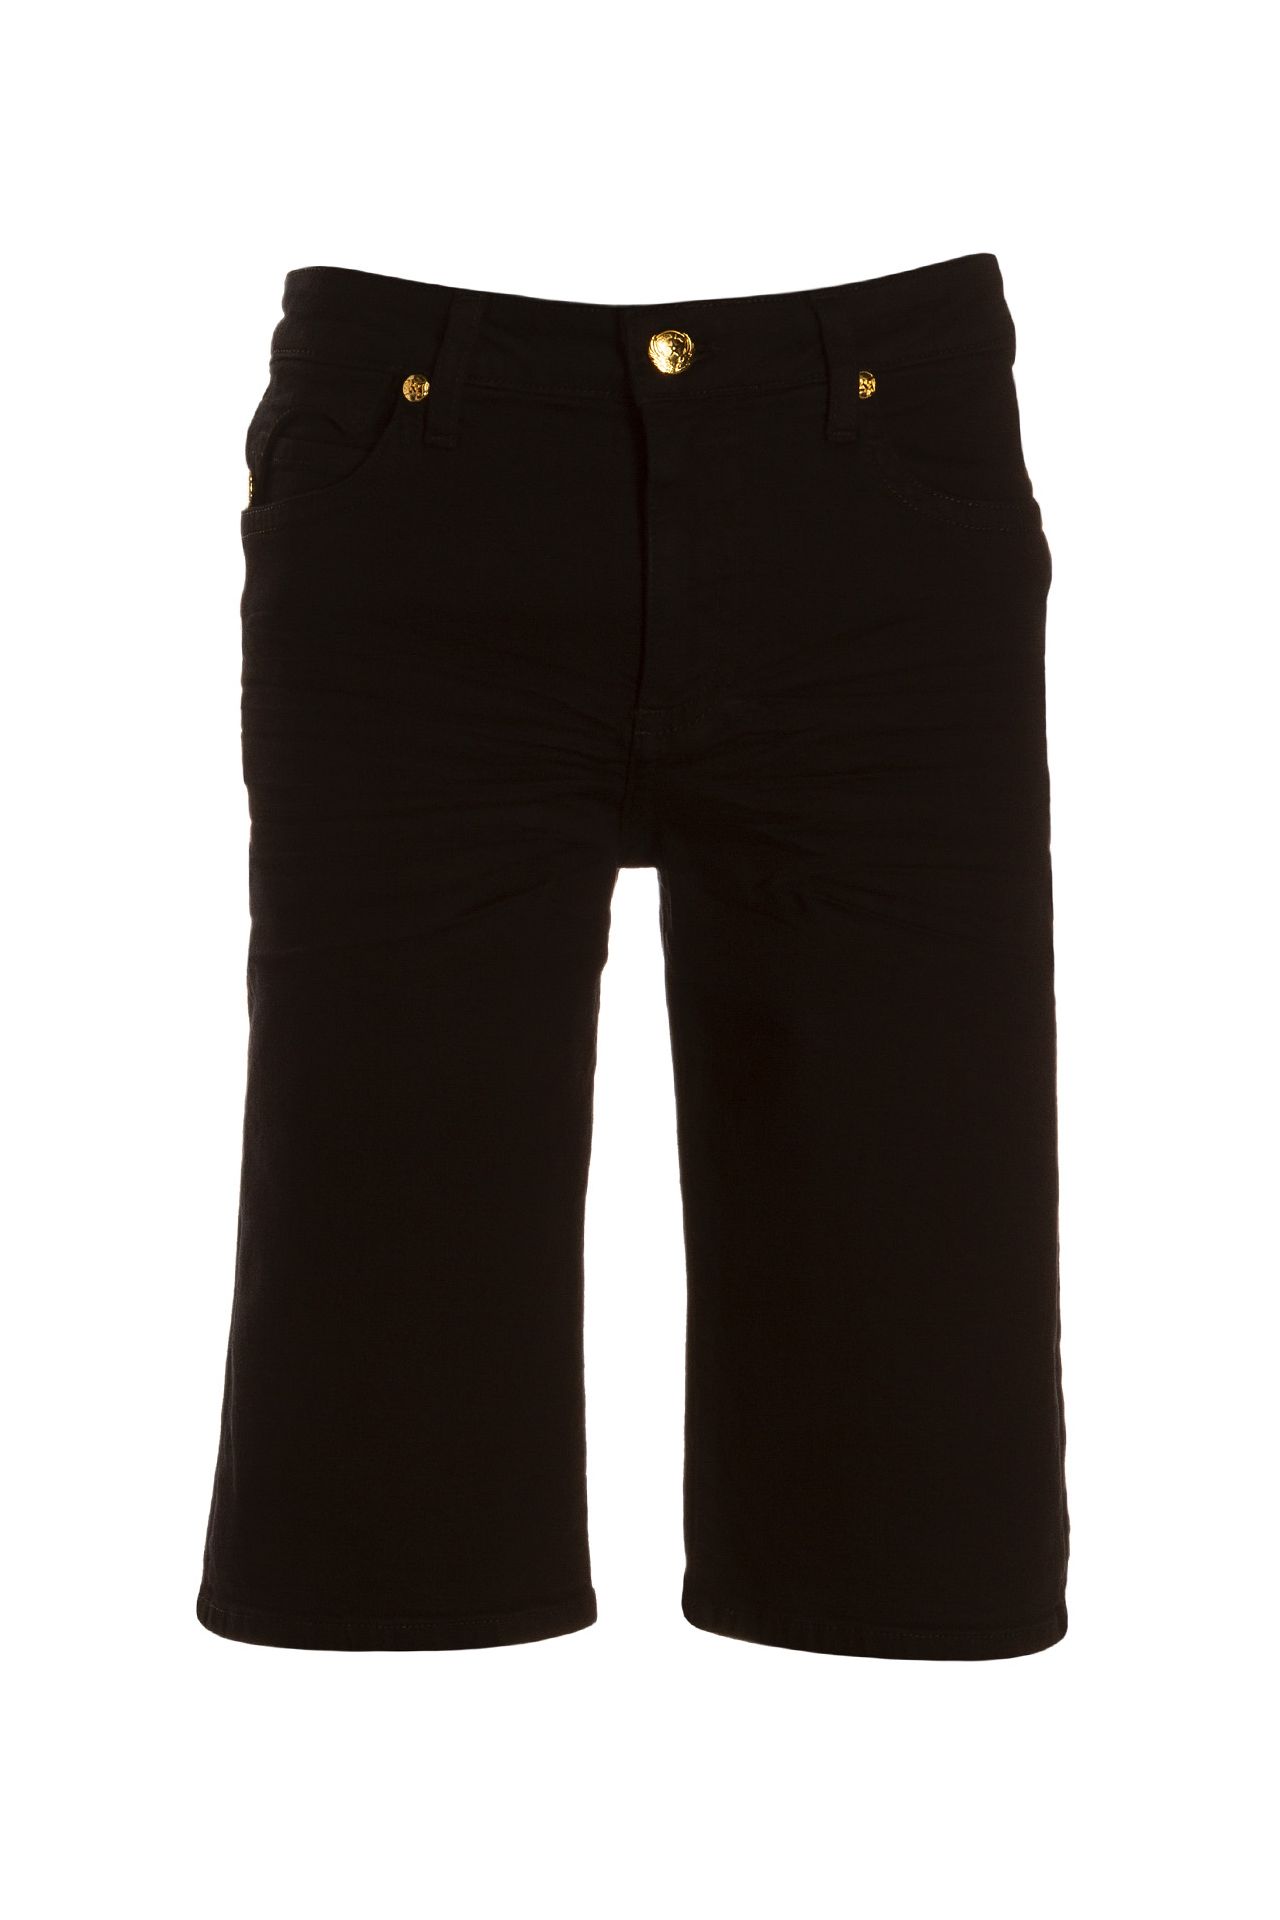 KILLER FLAP SHORTS IN BLACK AND GOLD